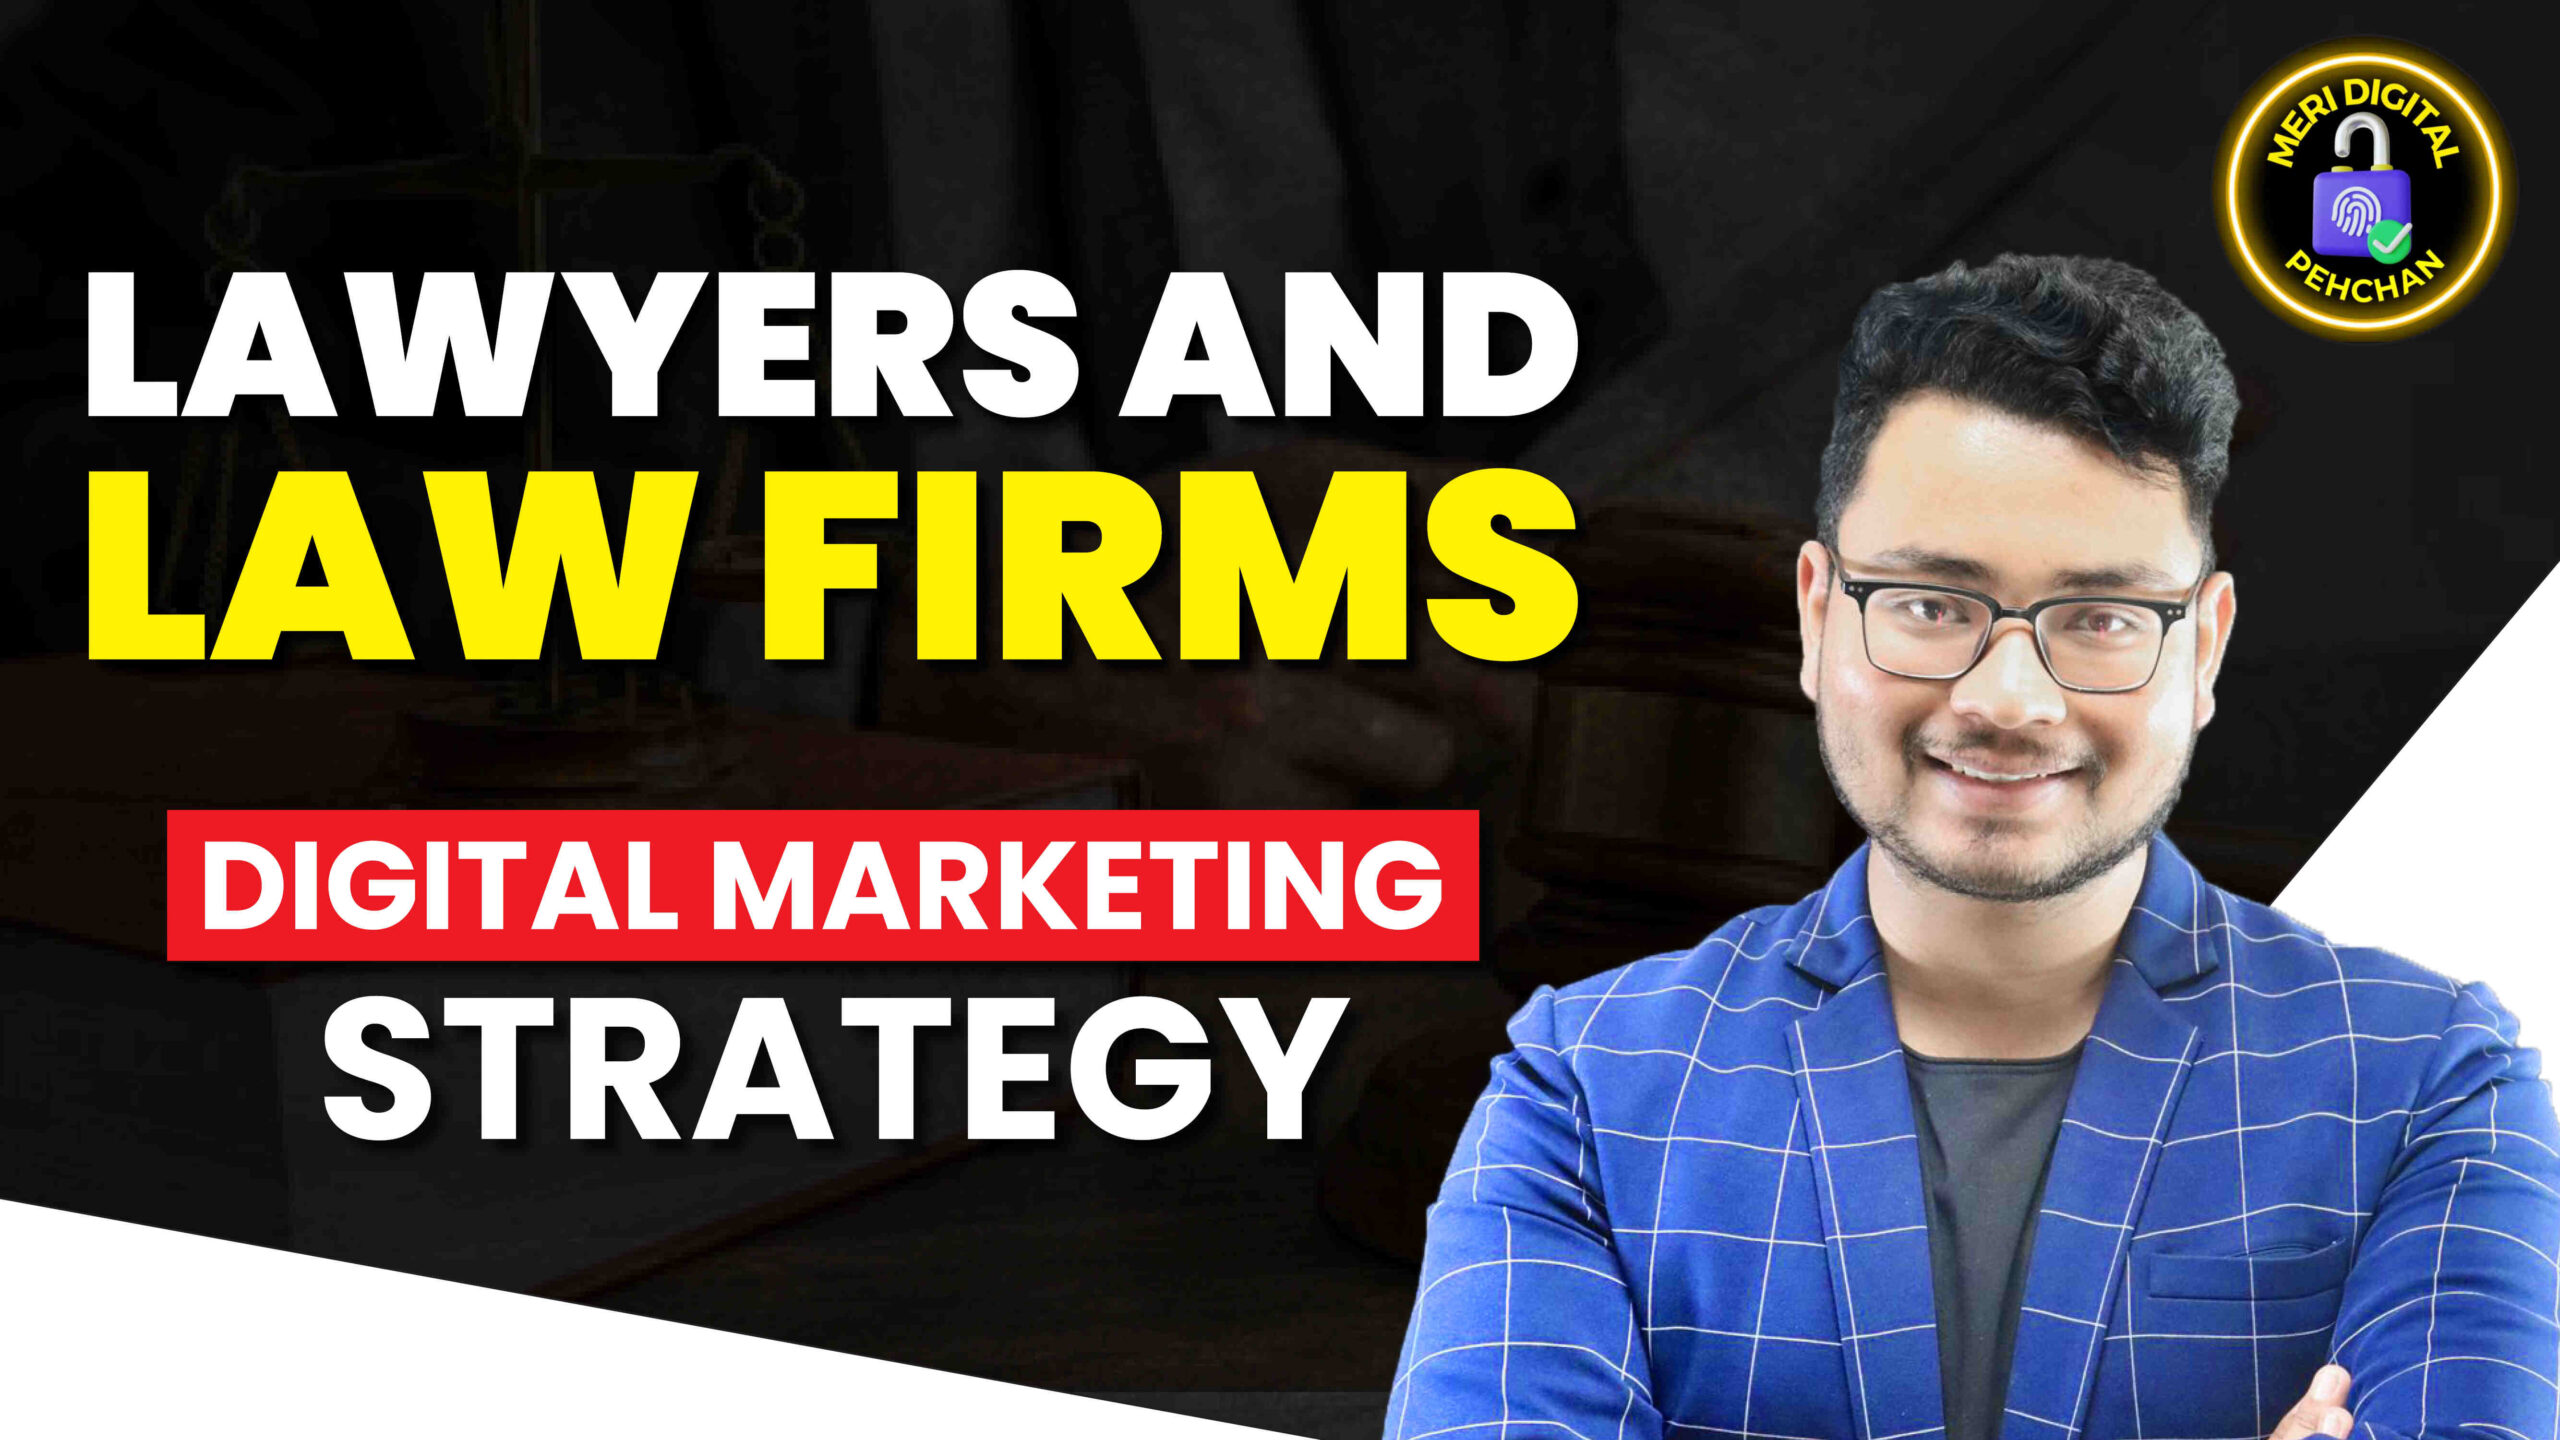 Digital Marketing Strategy for Lawyers to Grow Clients